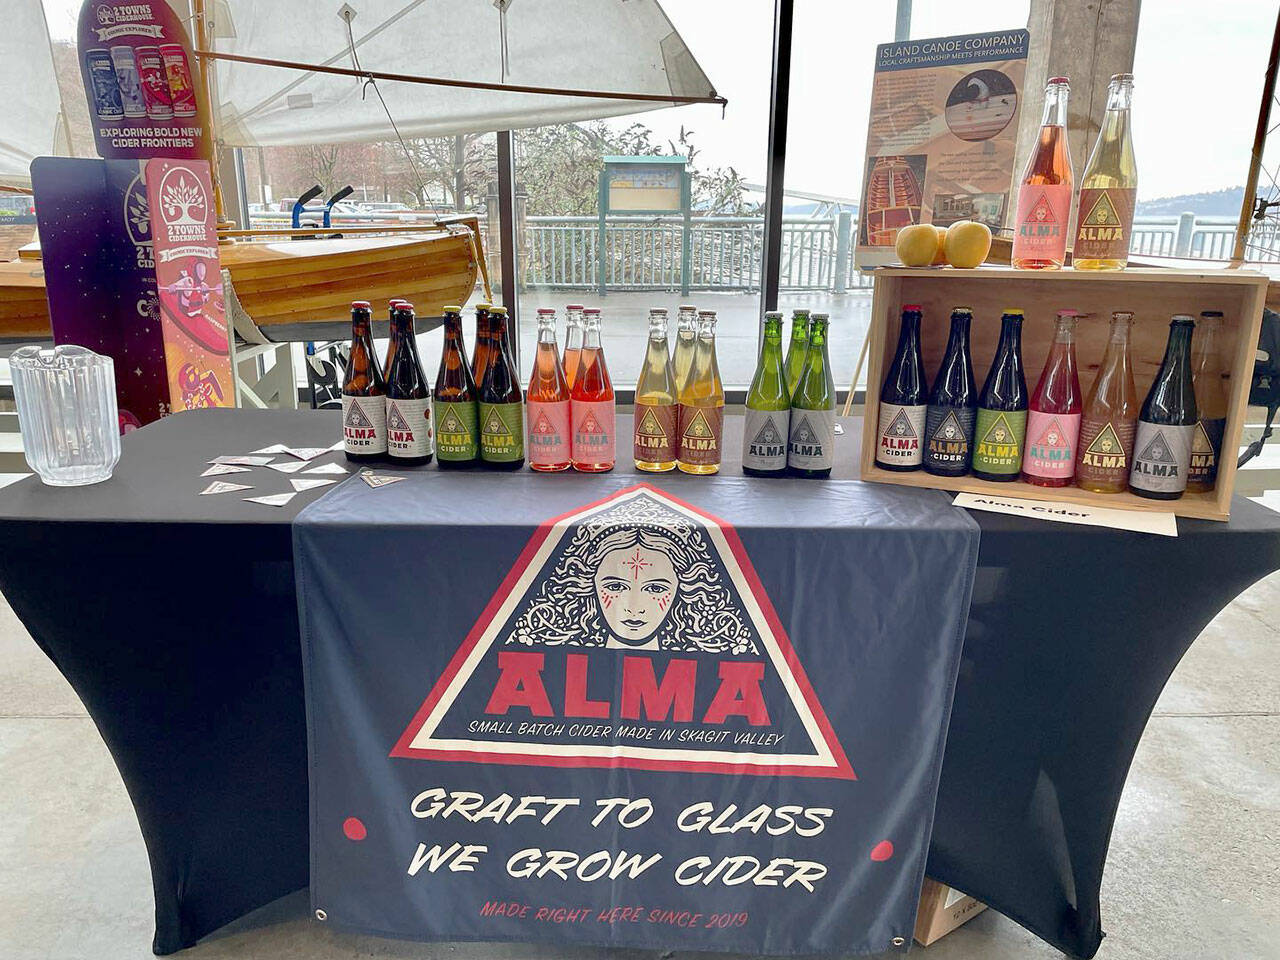 Mount Vernon-based Alma Cider will be one of several cideries and breweries at the Cider & Ale Trail on Friday, March 8 in historic downtown Kent. COURTESY PHOTO, Alma Cider